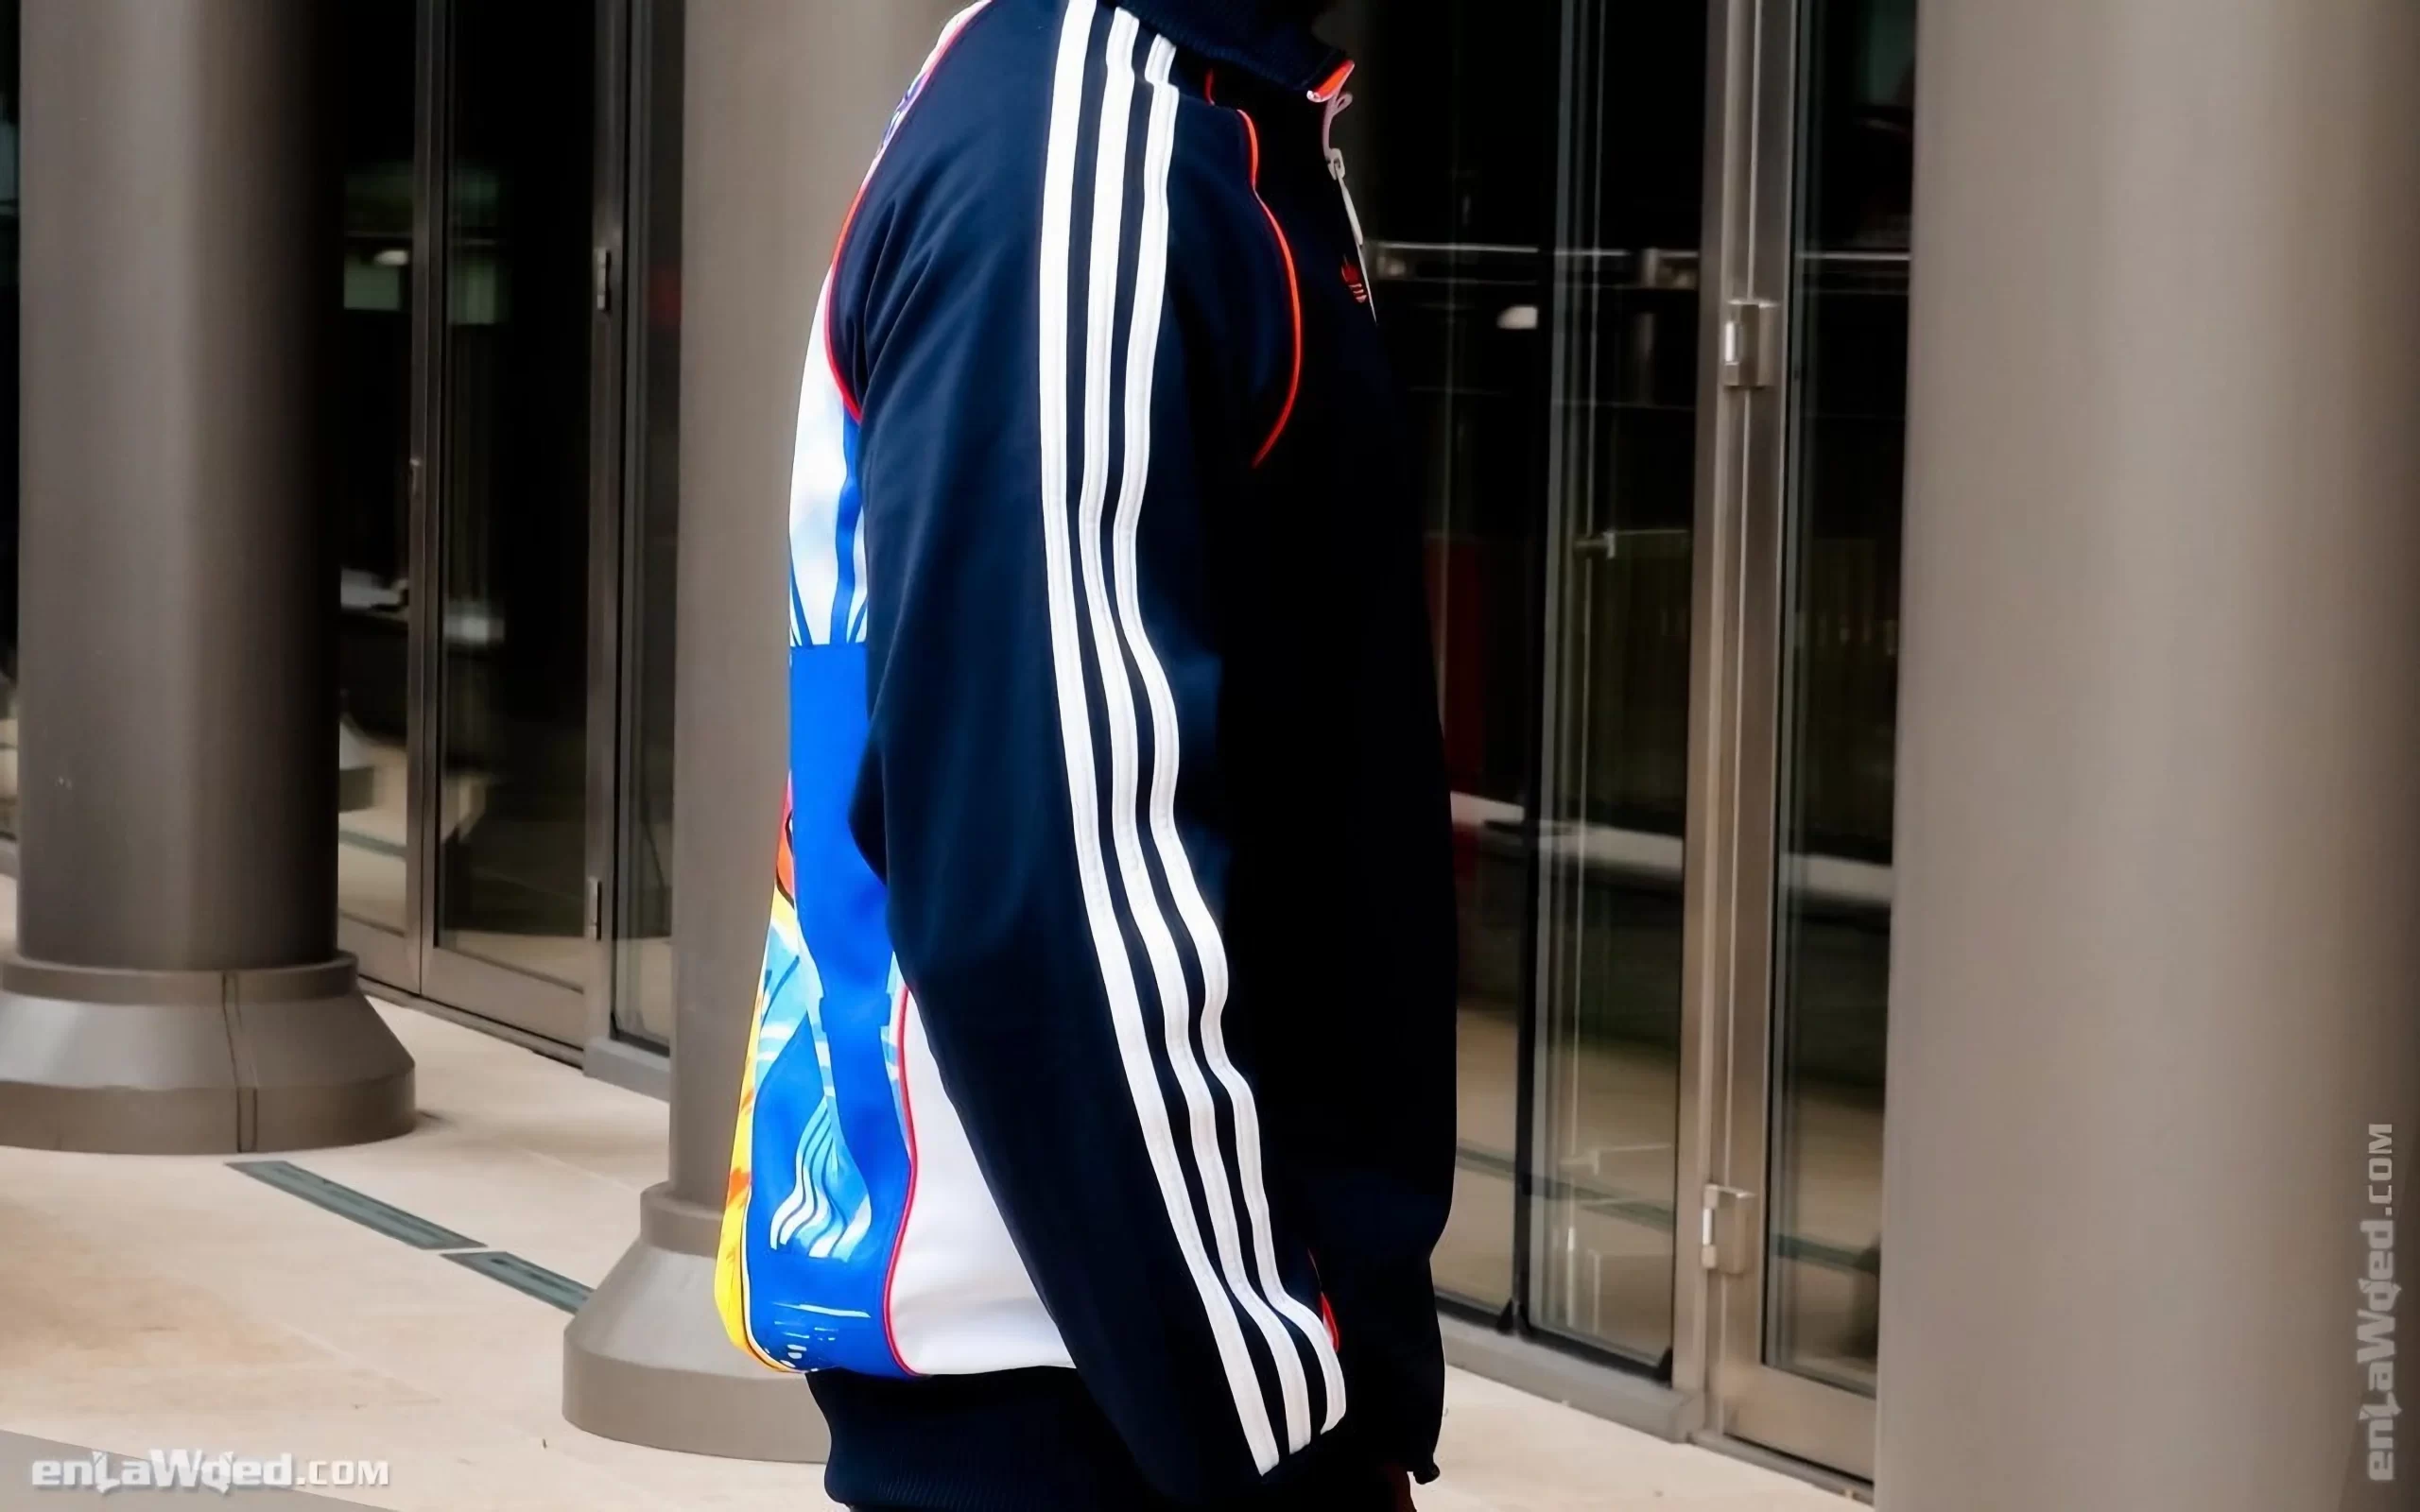 Men’s 2006 New York City Track Top by Adidas Originals: Backed (EnLawded.com file #lmchk90410ip2y123198kg9st)